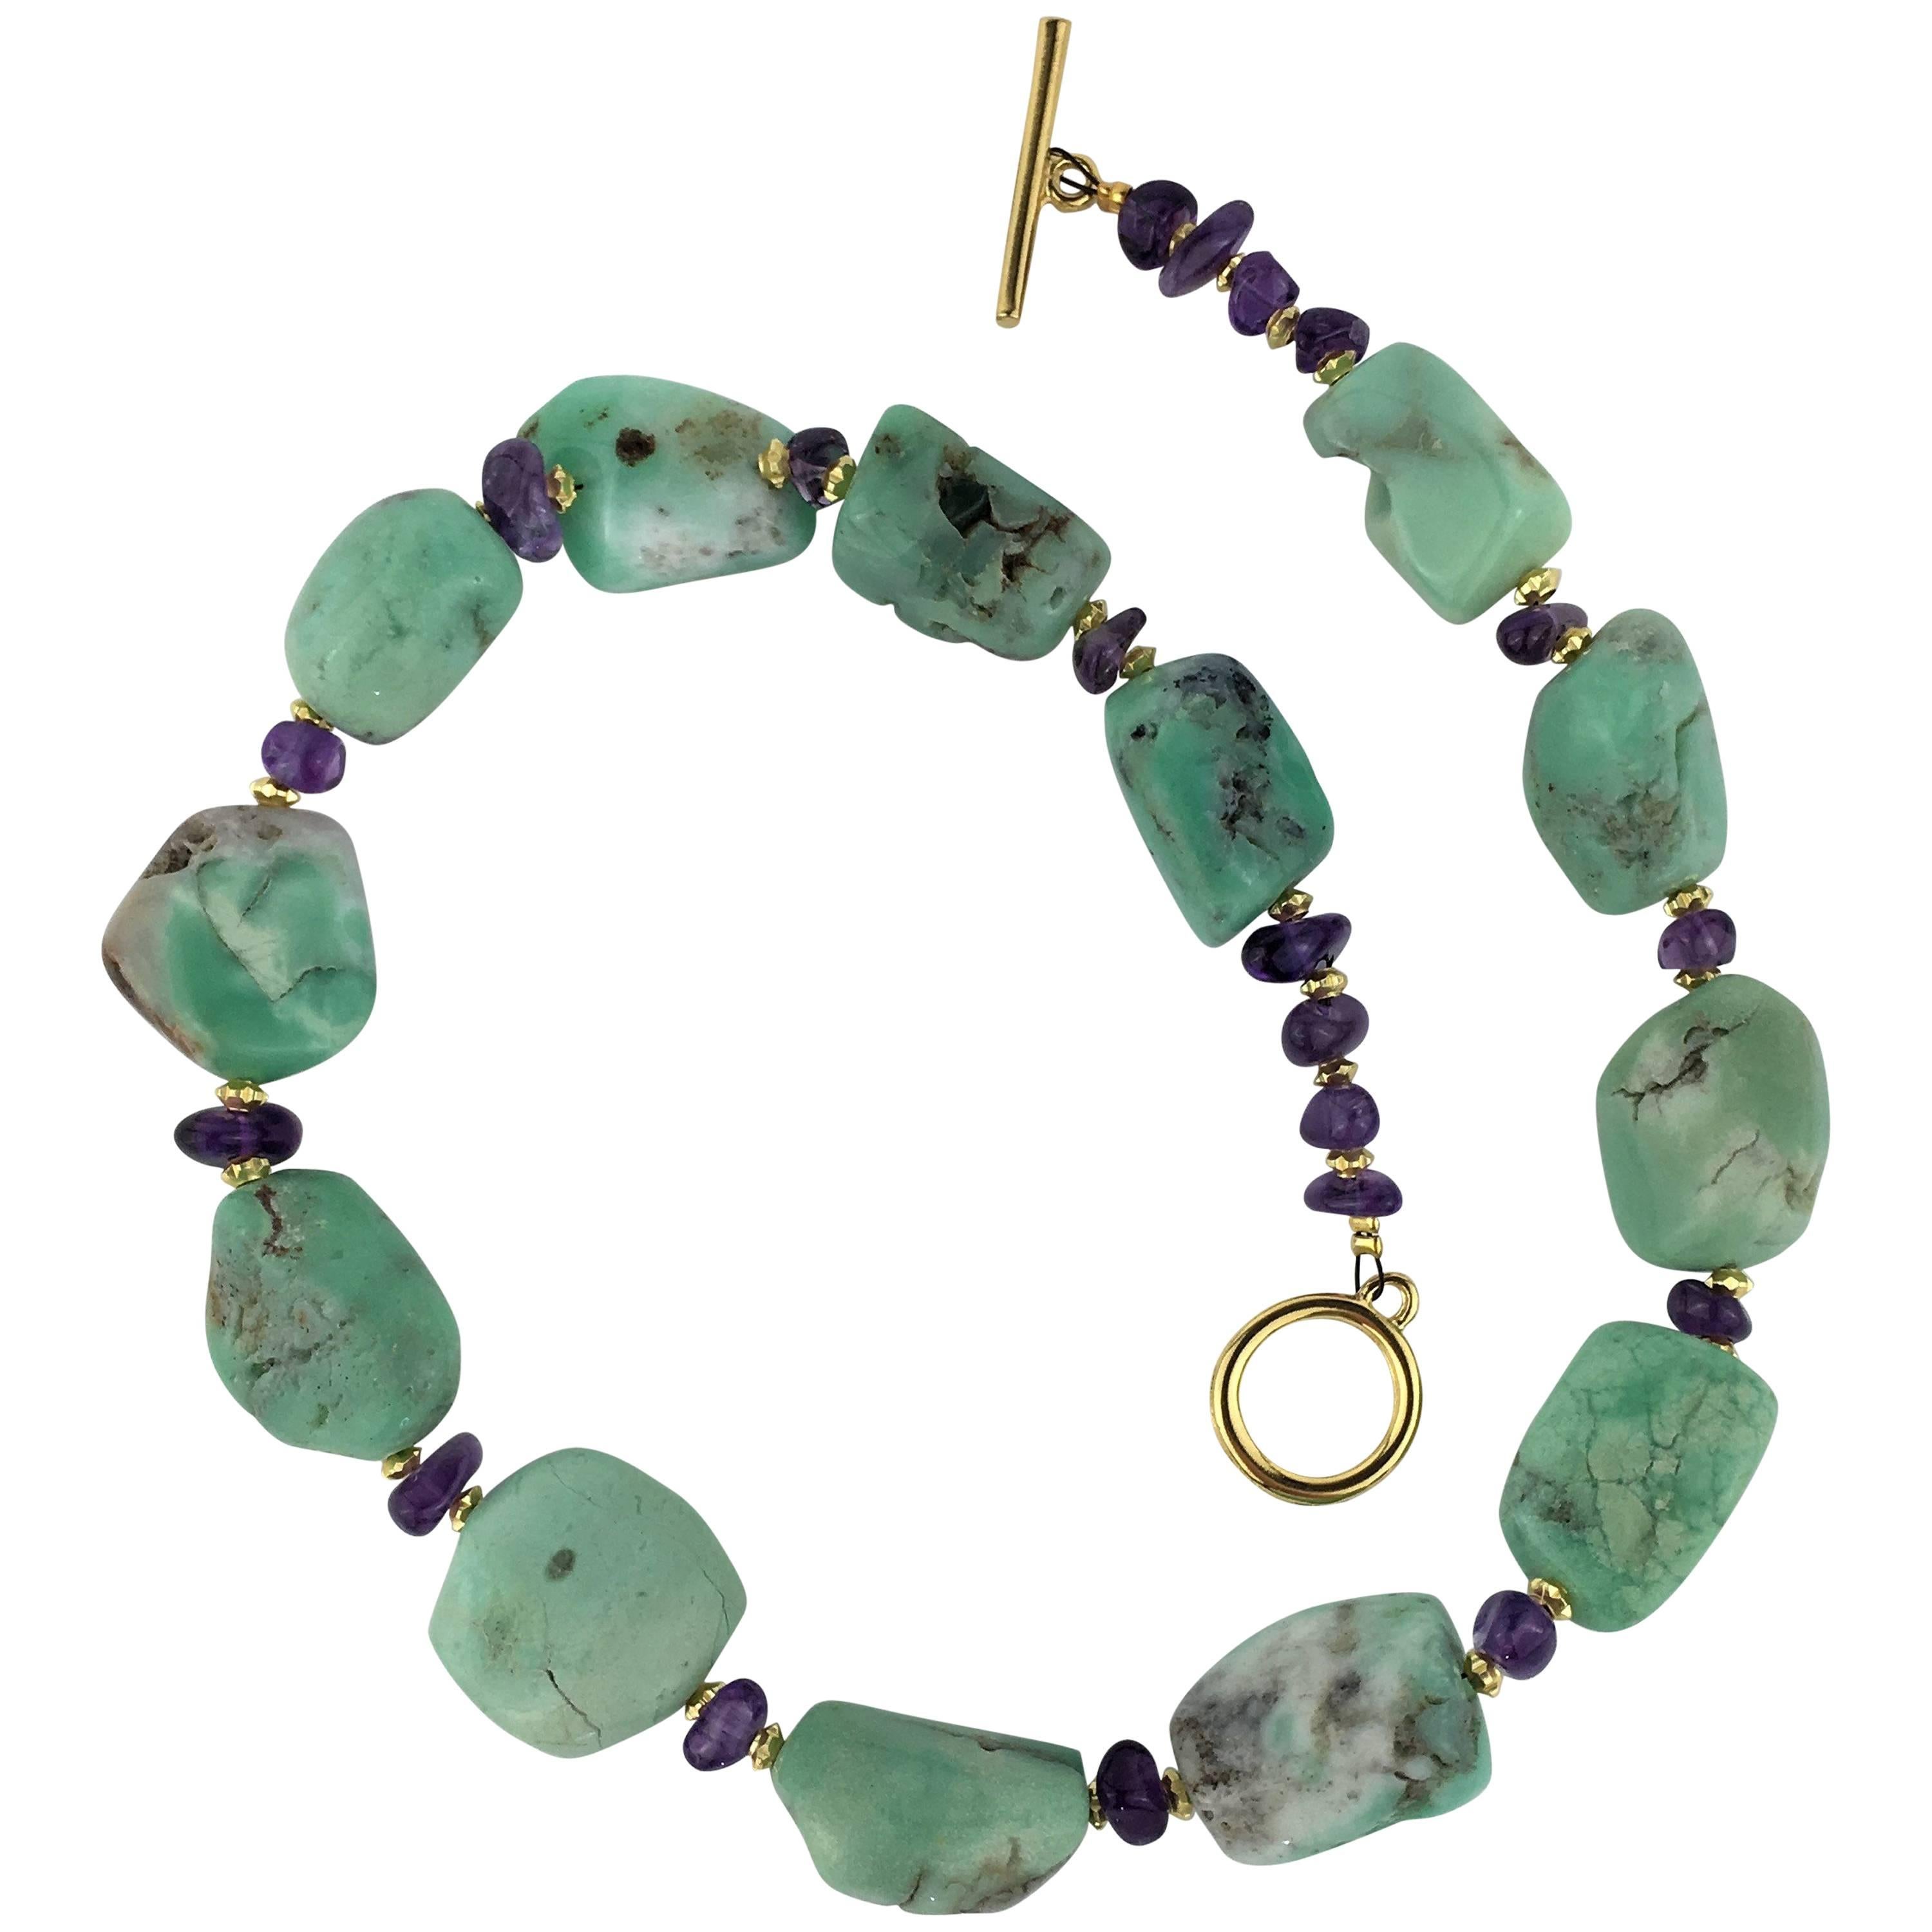 Artisan Polished Chrysoprase Nugget and Amethyst Necklace